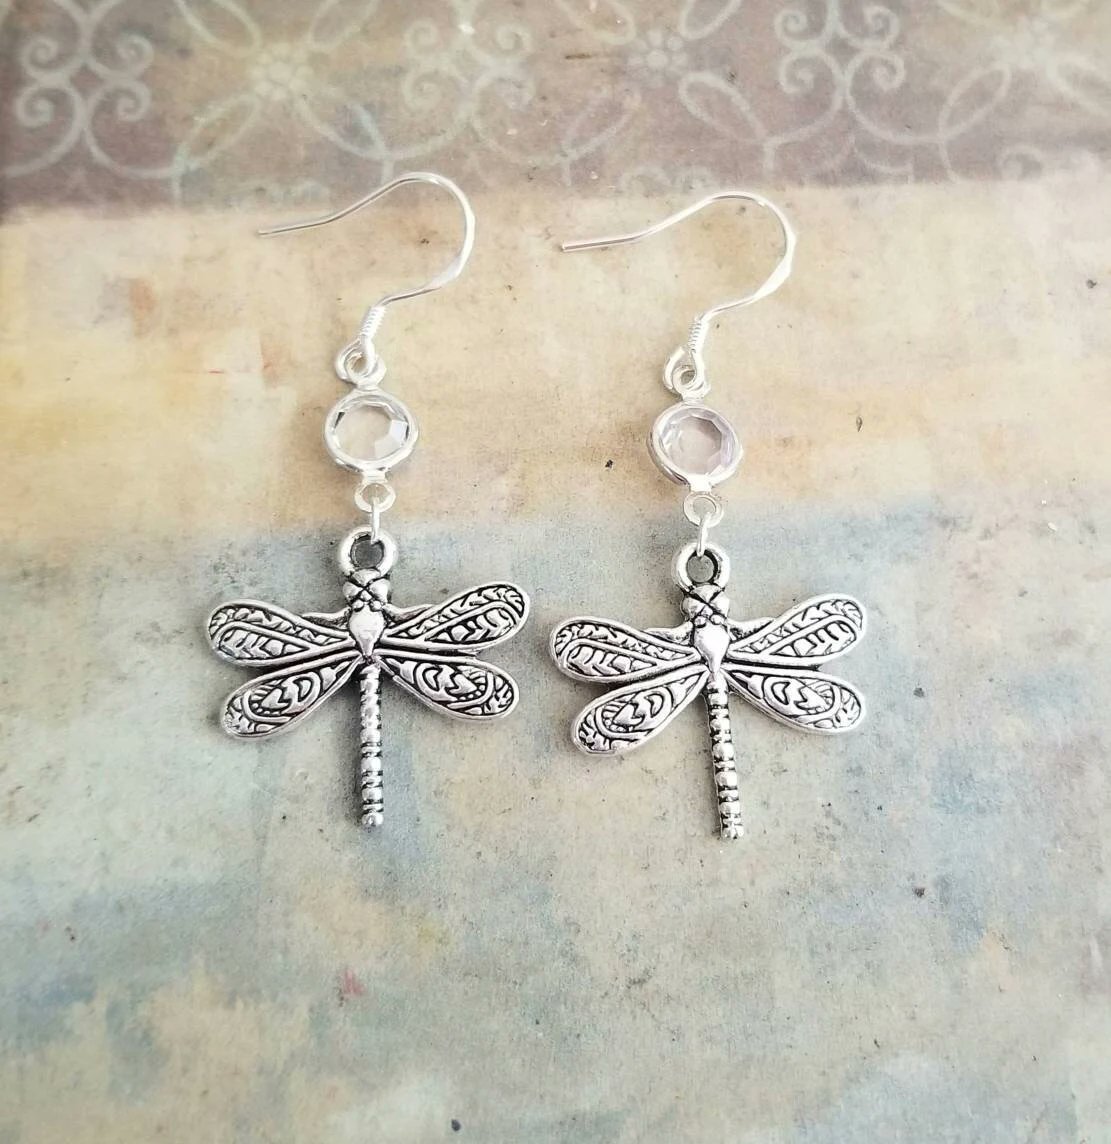 Silver Dragonfly Earrings, Dragonfly, Dangle Earrings, #Dragonfly #dragonflies #earrings #silverearrings #dragonflyearrings #giftsforher #jewelry #handmadejewelry #giftsformom #momgift #Mothersday #Mothersdaygift 

etsy.me/3LT4AOu via @Etsy